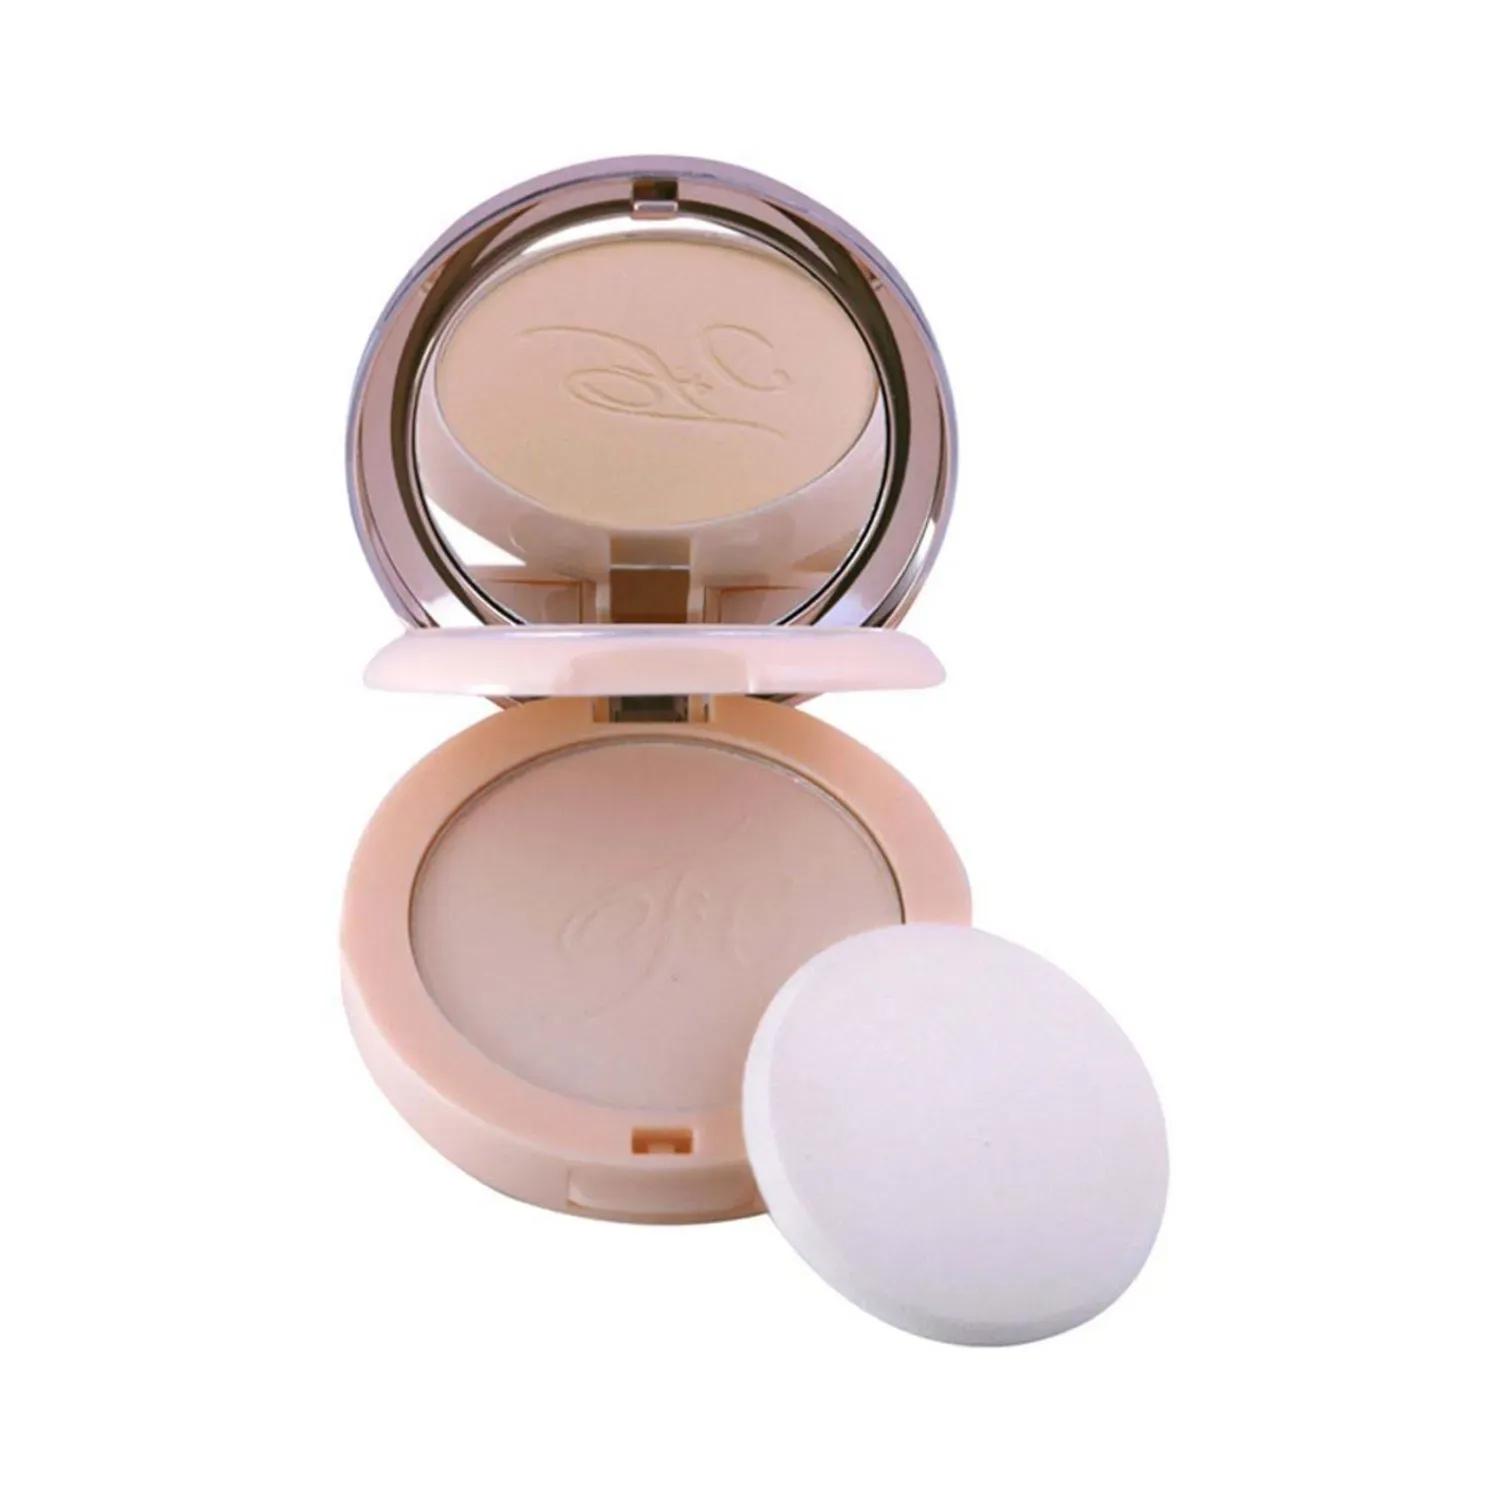 fashion colour nude makeover 2-in-1 compact face powder - 02 shade (20g)